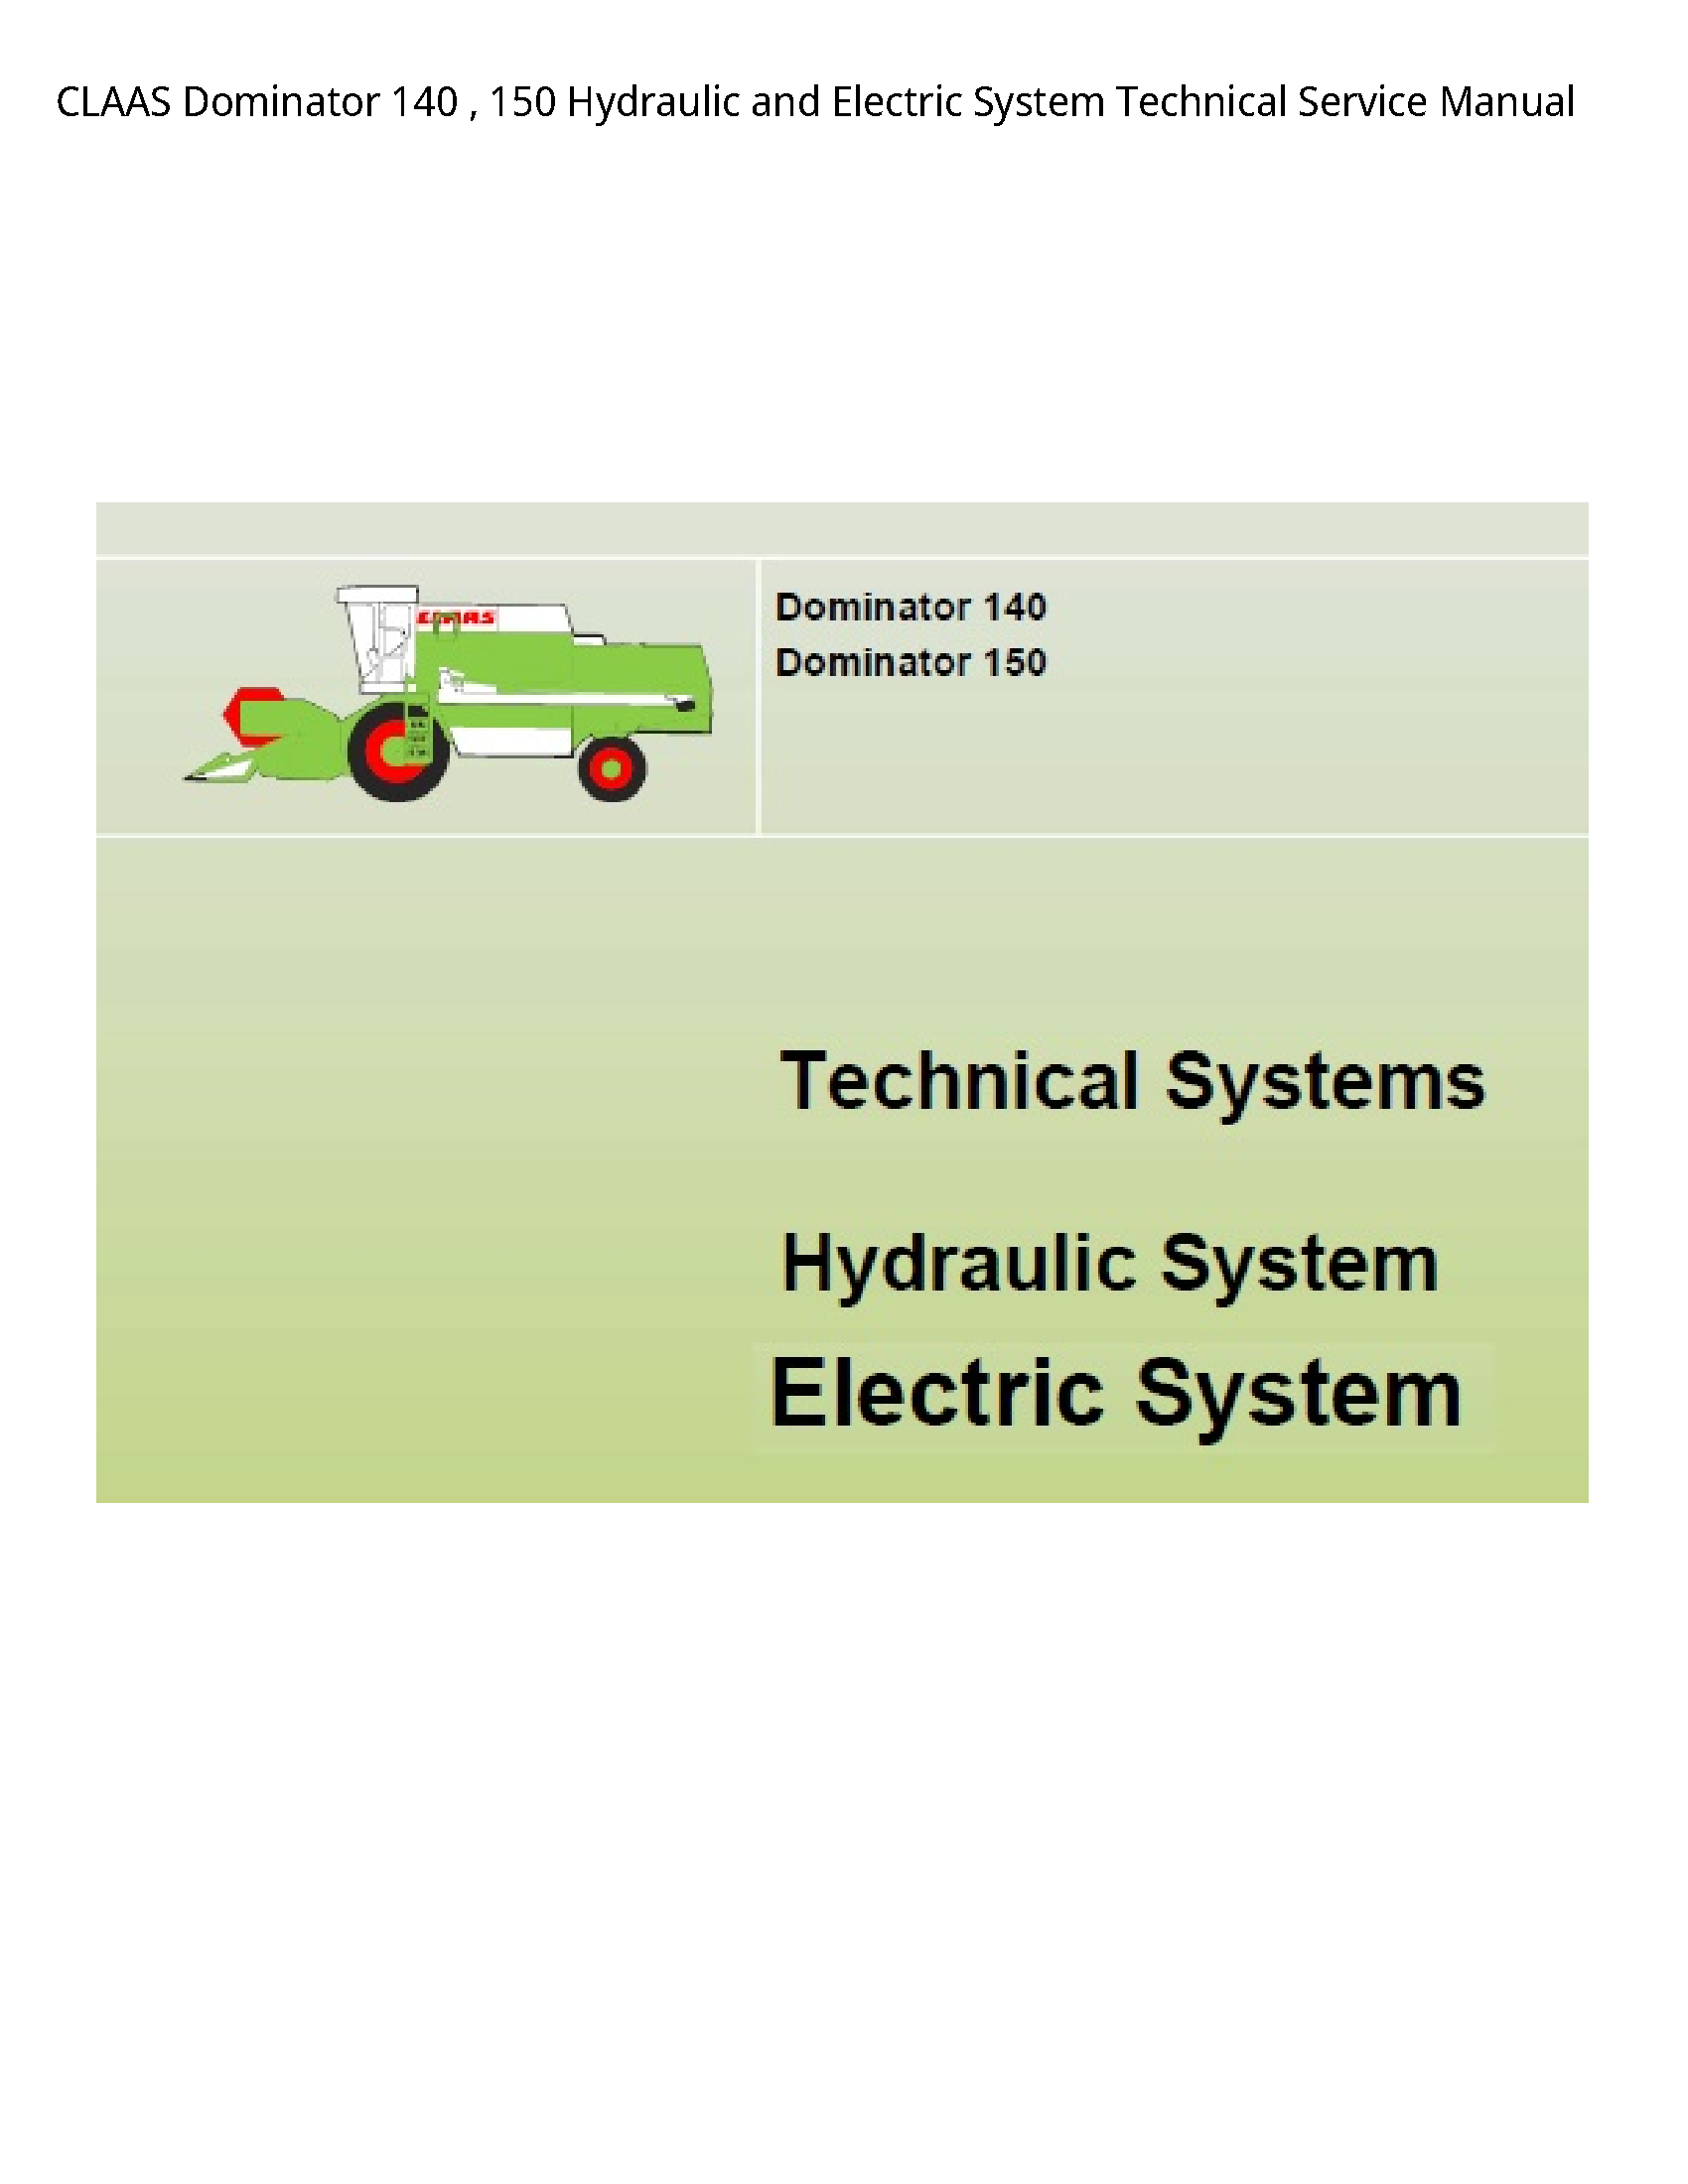 Claas 140 Dominator Hydraulic  Electric System Technical Service manual